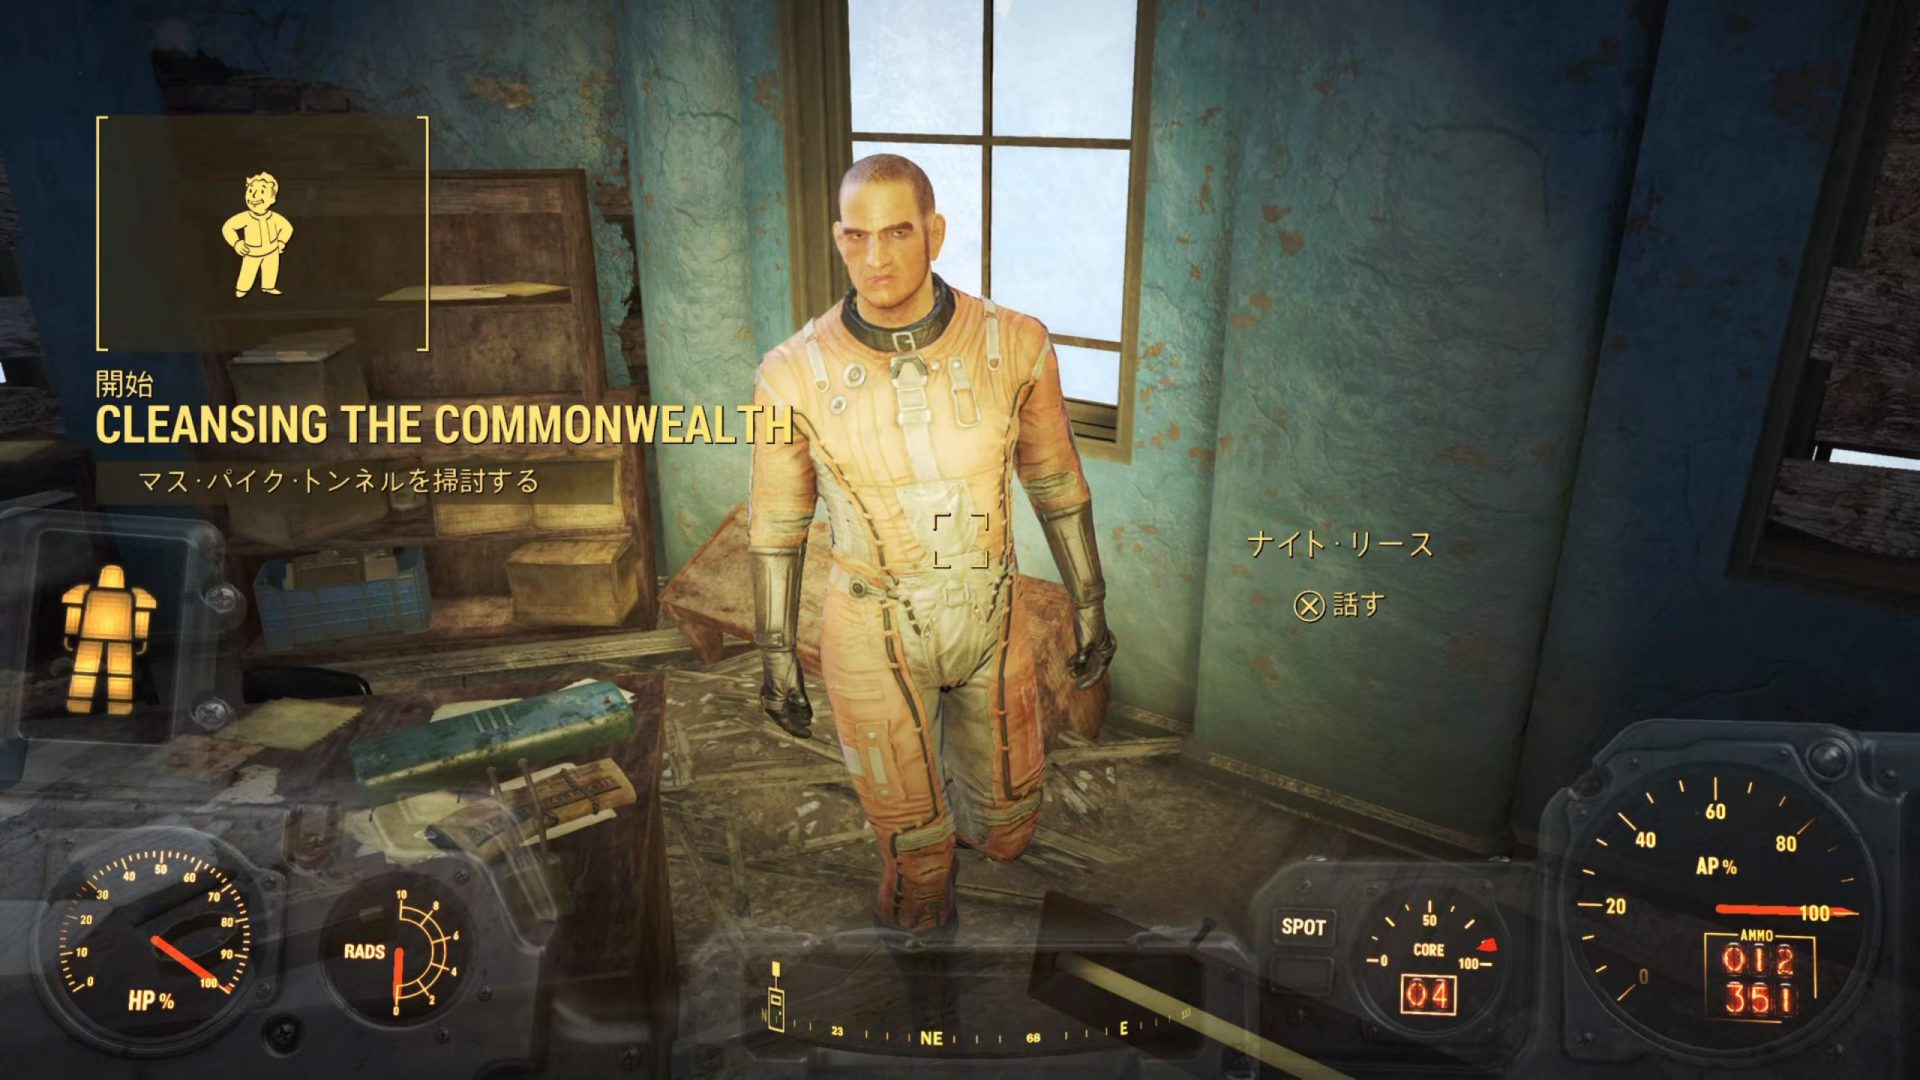 Cleansing the Commonwealth